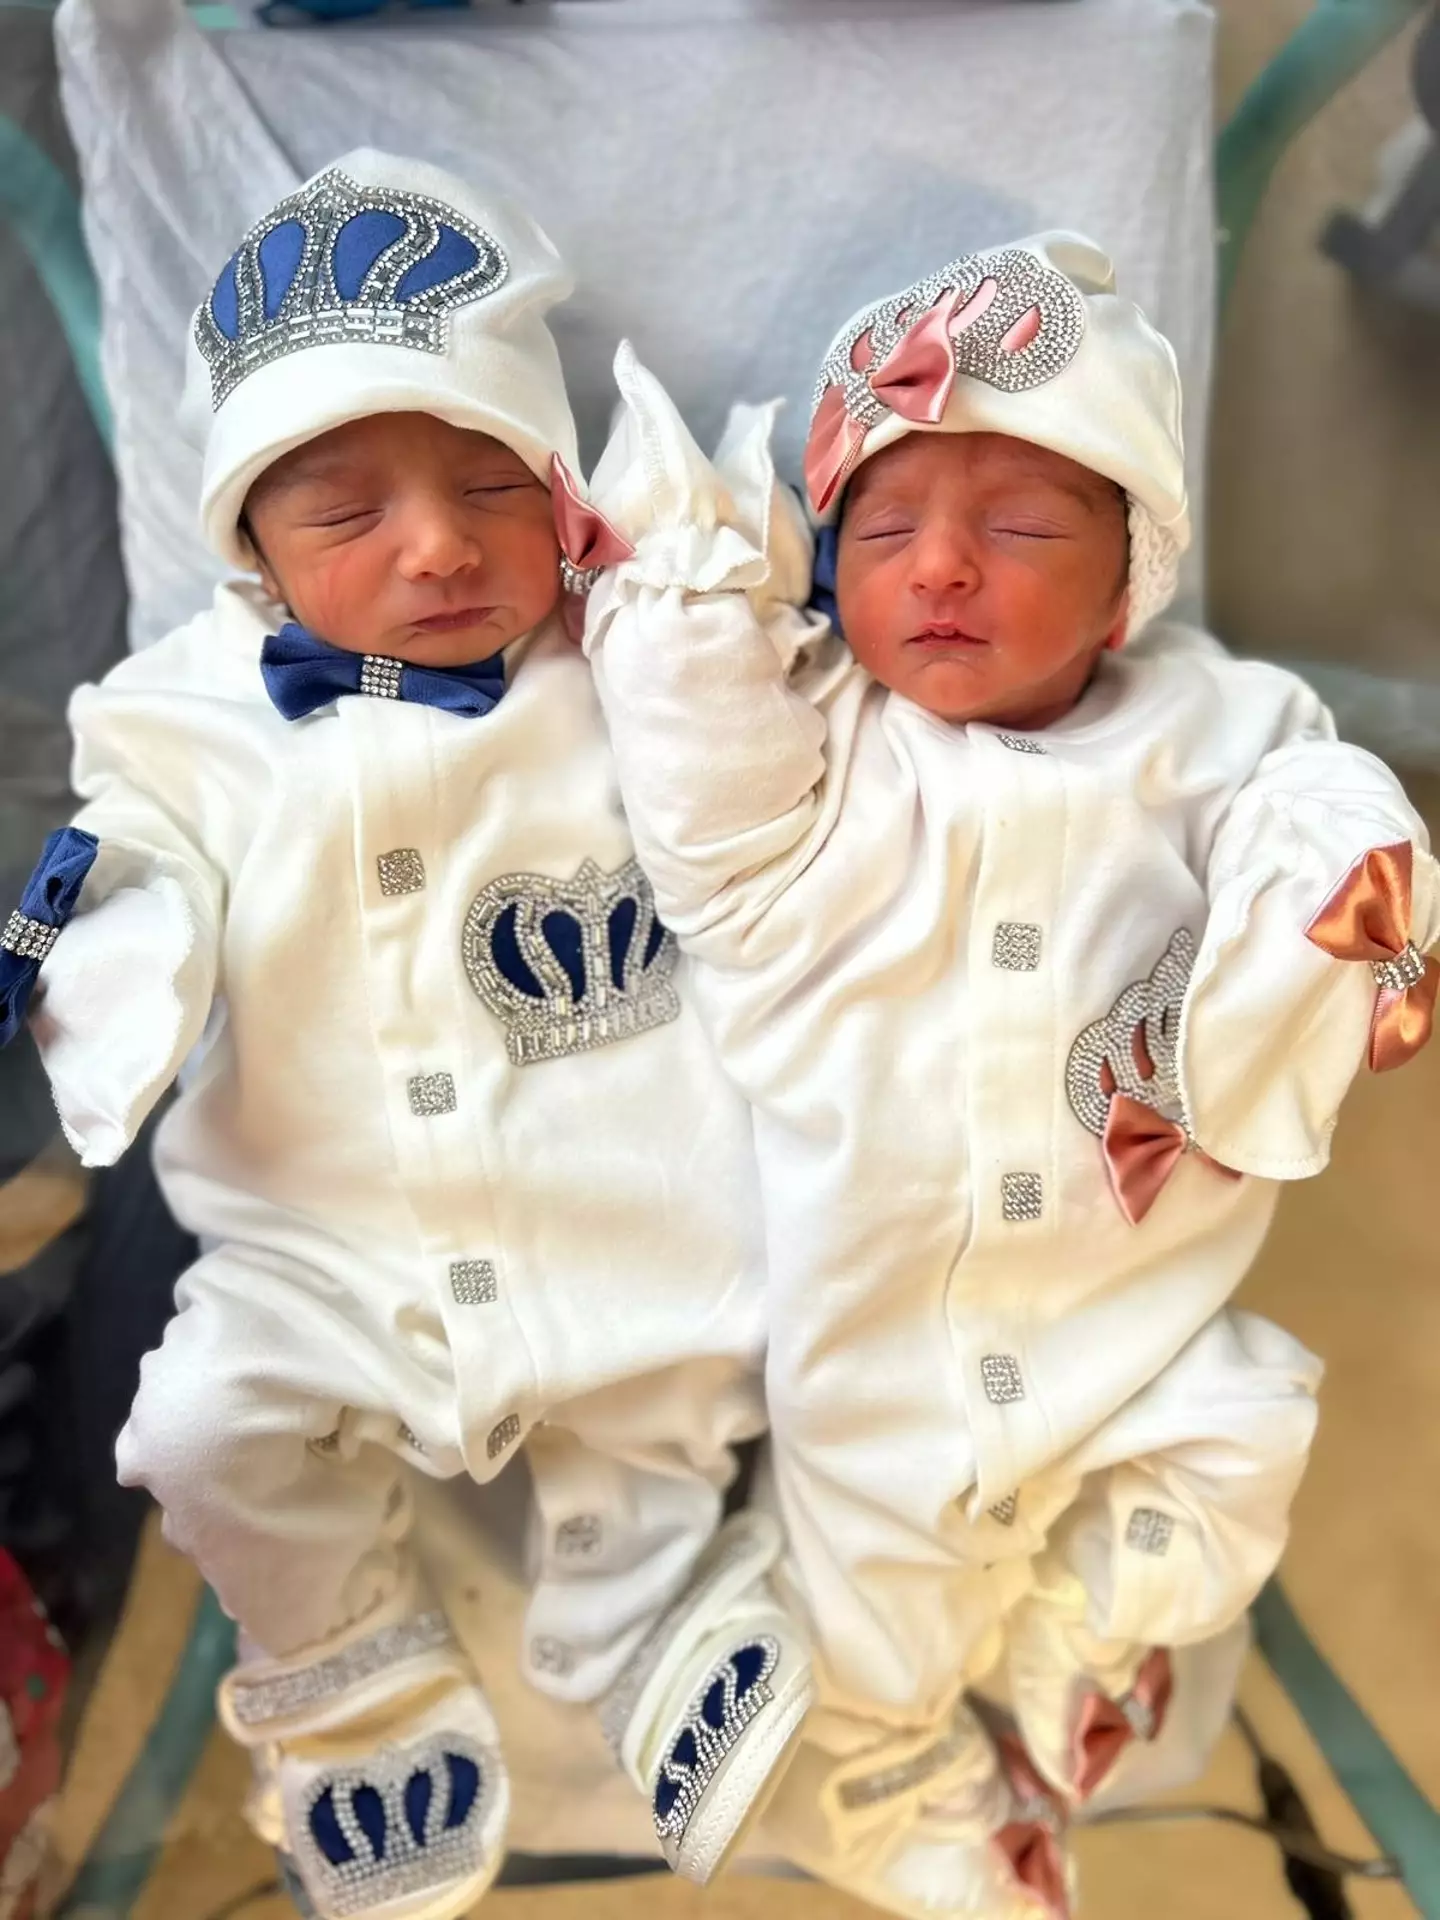 The twins were born on Christmas Eve and Christmas Day.